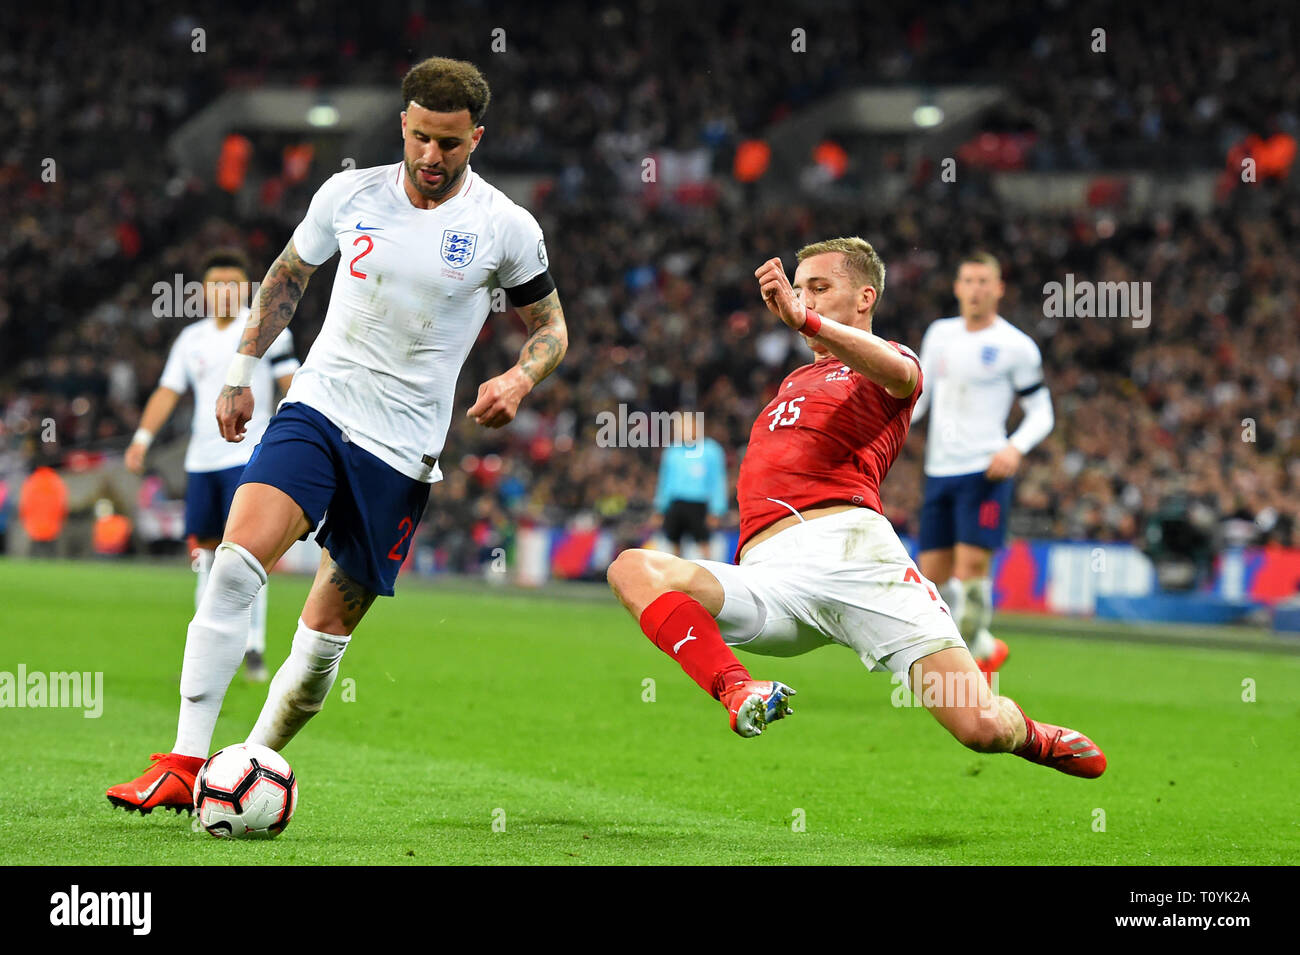 London, UK. 22nd Mar 2019. Czech Republic midfielder Tomas Soucek flies in to tackle England defender Kyle Walker during the UEFA European Championship Group A Qualifying match between England and Czech Republic at Wembley Stadium, London on Saturday 23rd March 2019. (Credit: Jon Bromley | MI News ) Credit: MI News & Sport /Alamy Live News Stock Photo